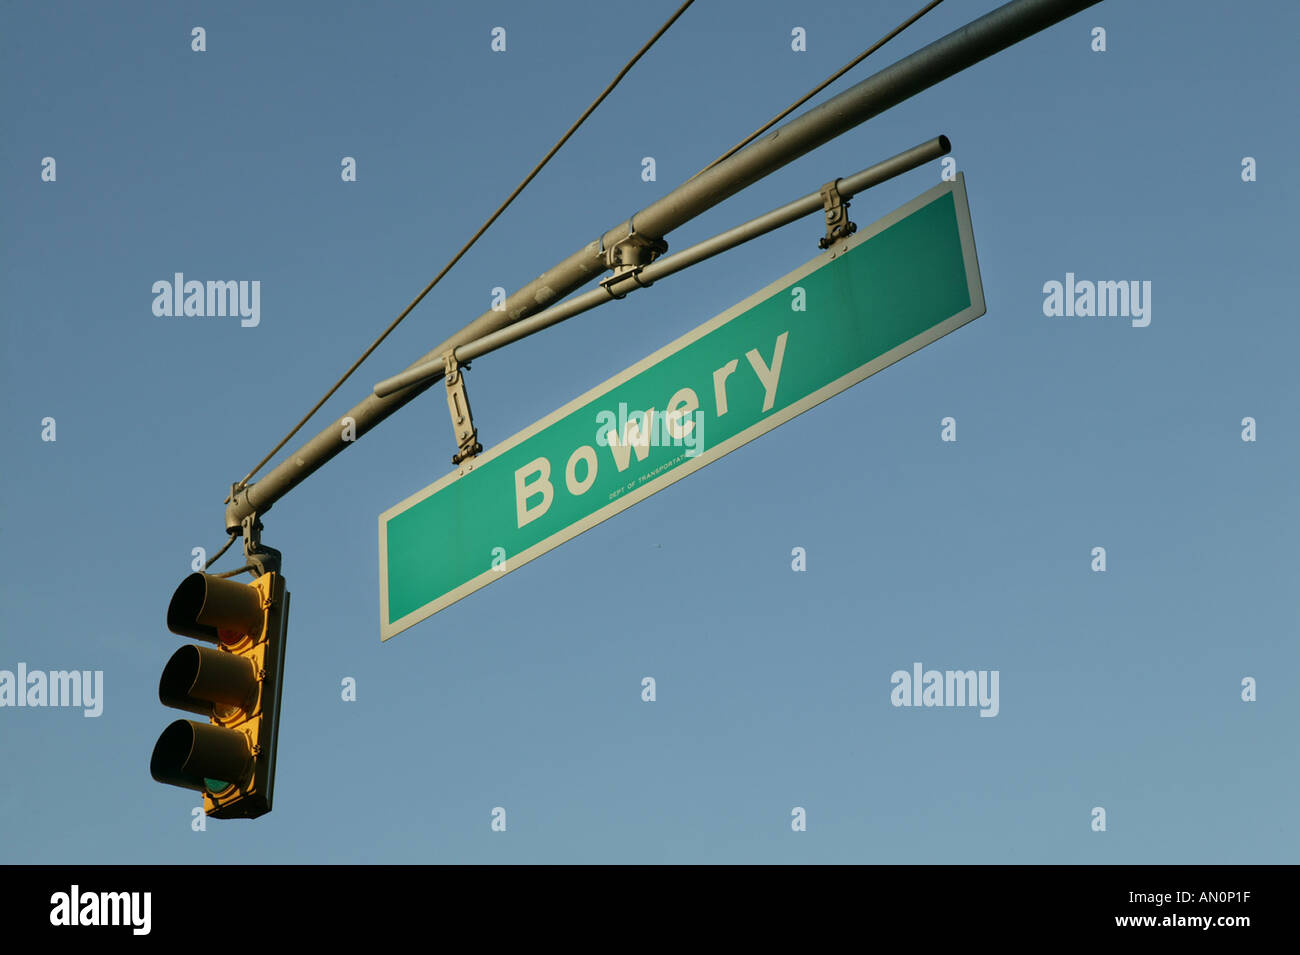 Bowery street sign and traffic light in New York USA June 2005 Stock Photo